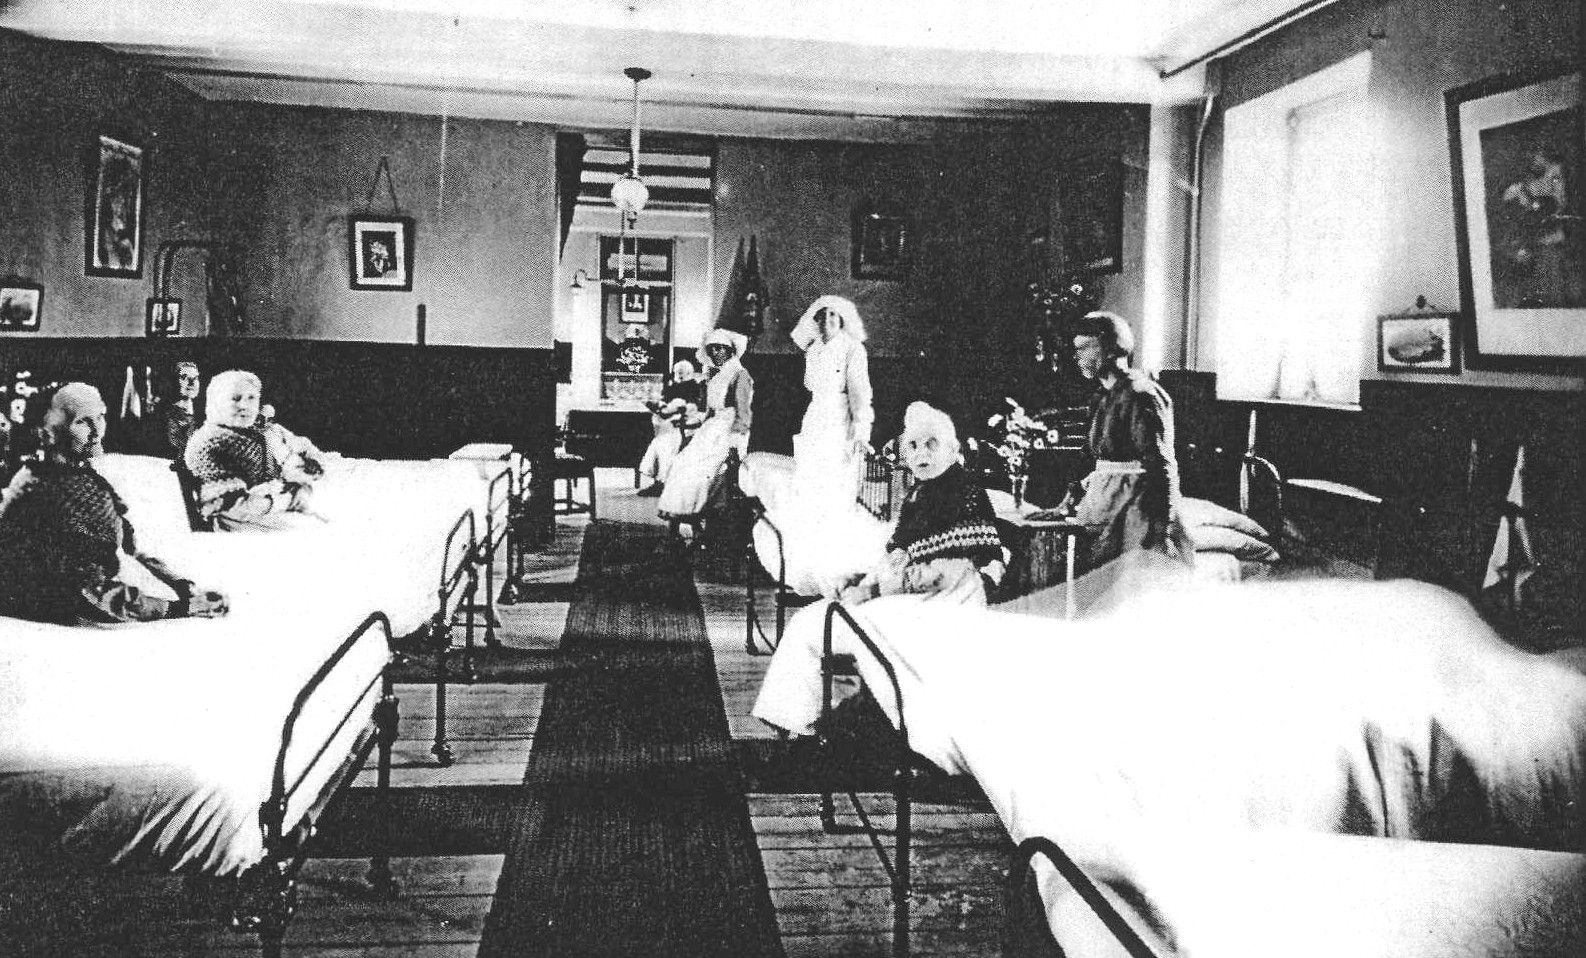 Interior of the workhouse infirmary.